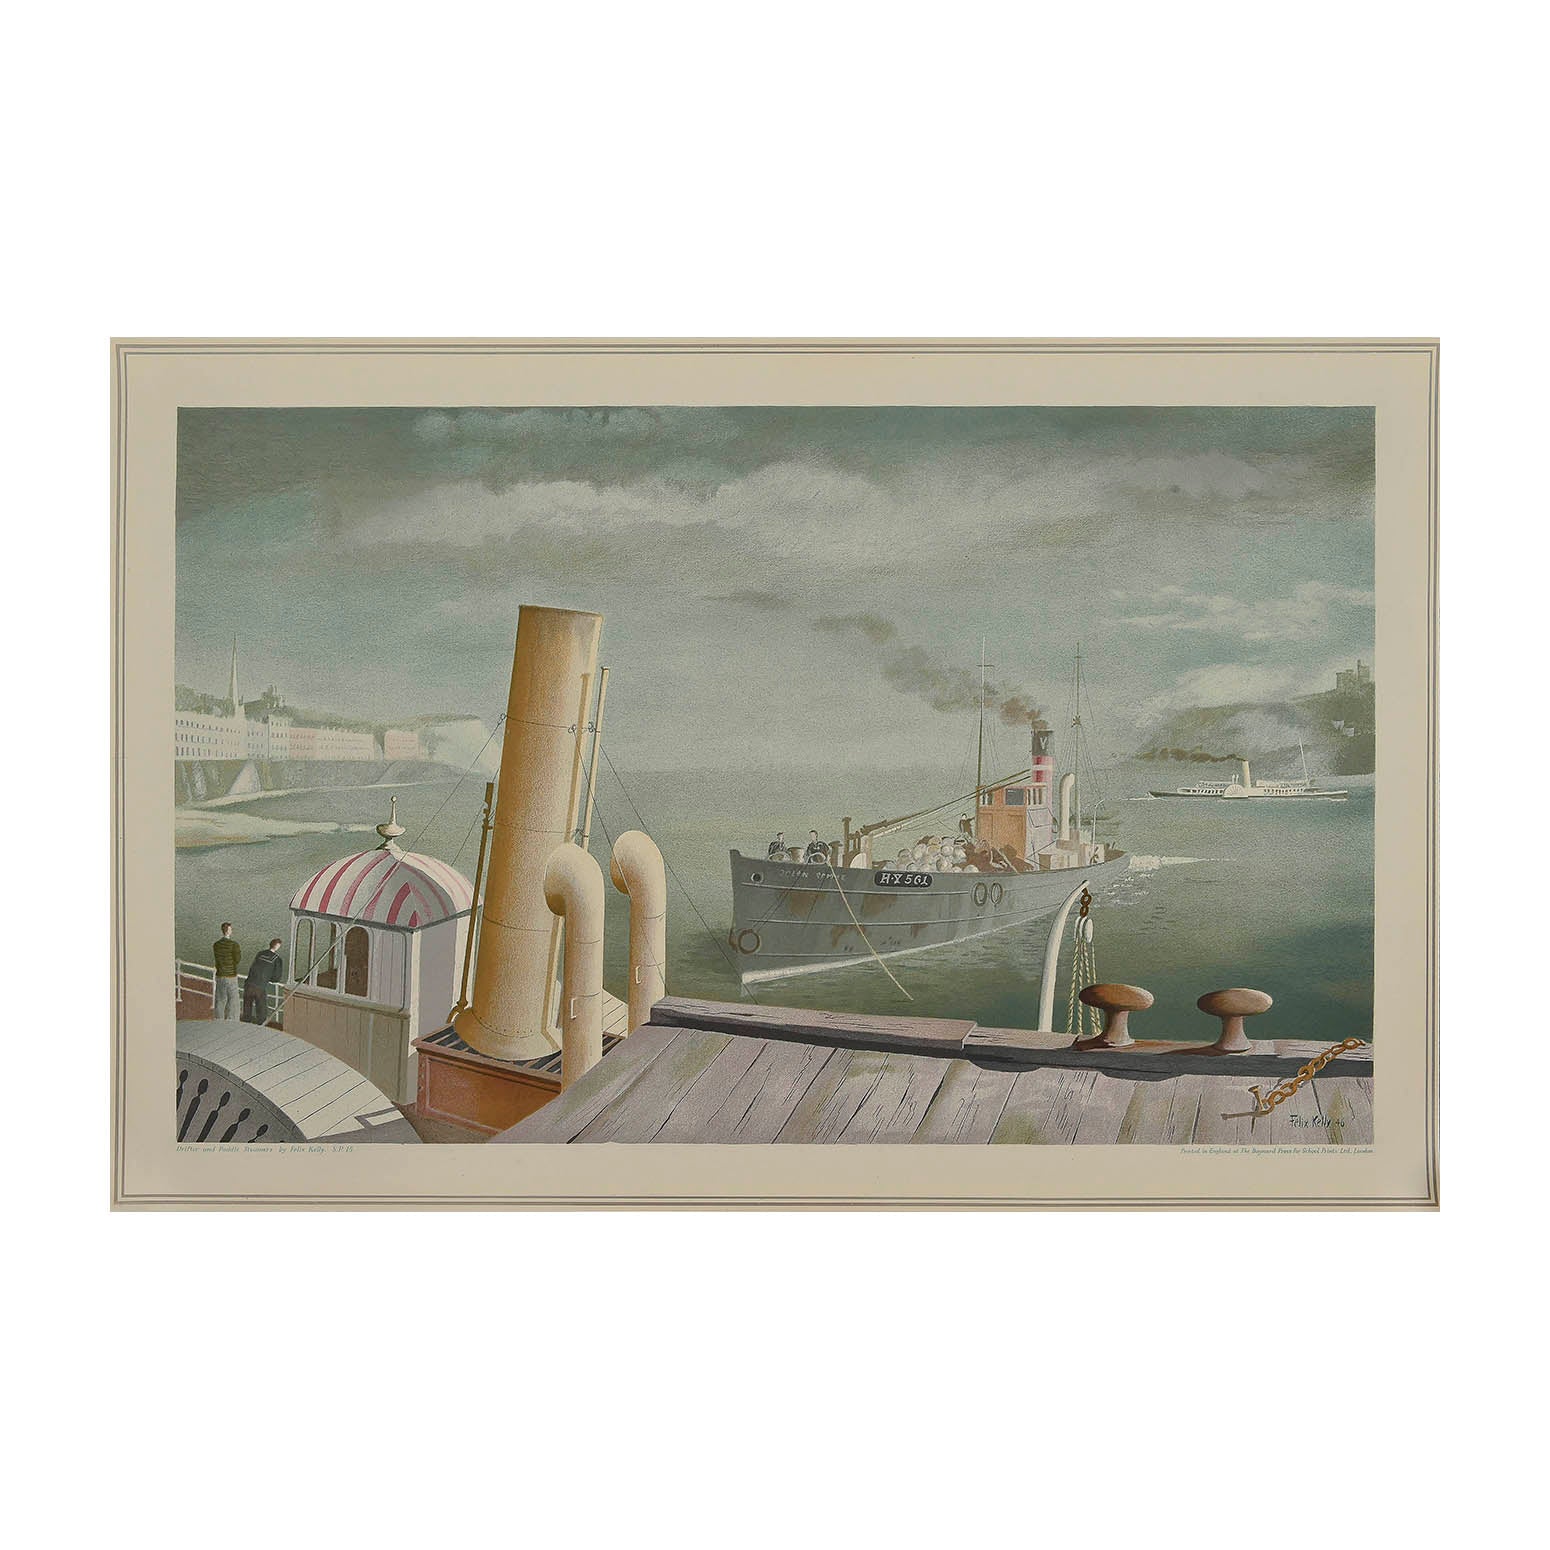 Original ‘School Print’, Drifter and Paddle Boats, painted by Felix Kelly, and published by School Prints Ltd, 1946. The image depicts a steam ship and two passenger steam paddle boats off the English coast